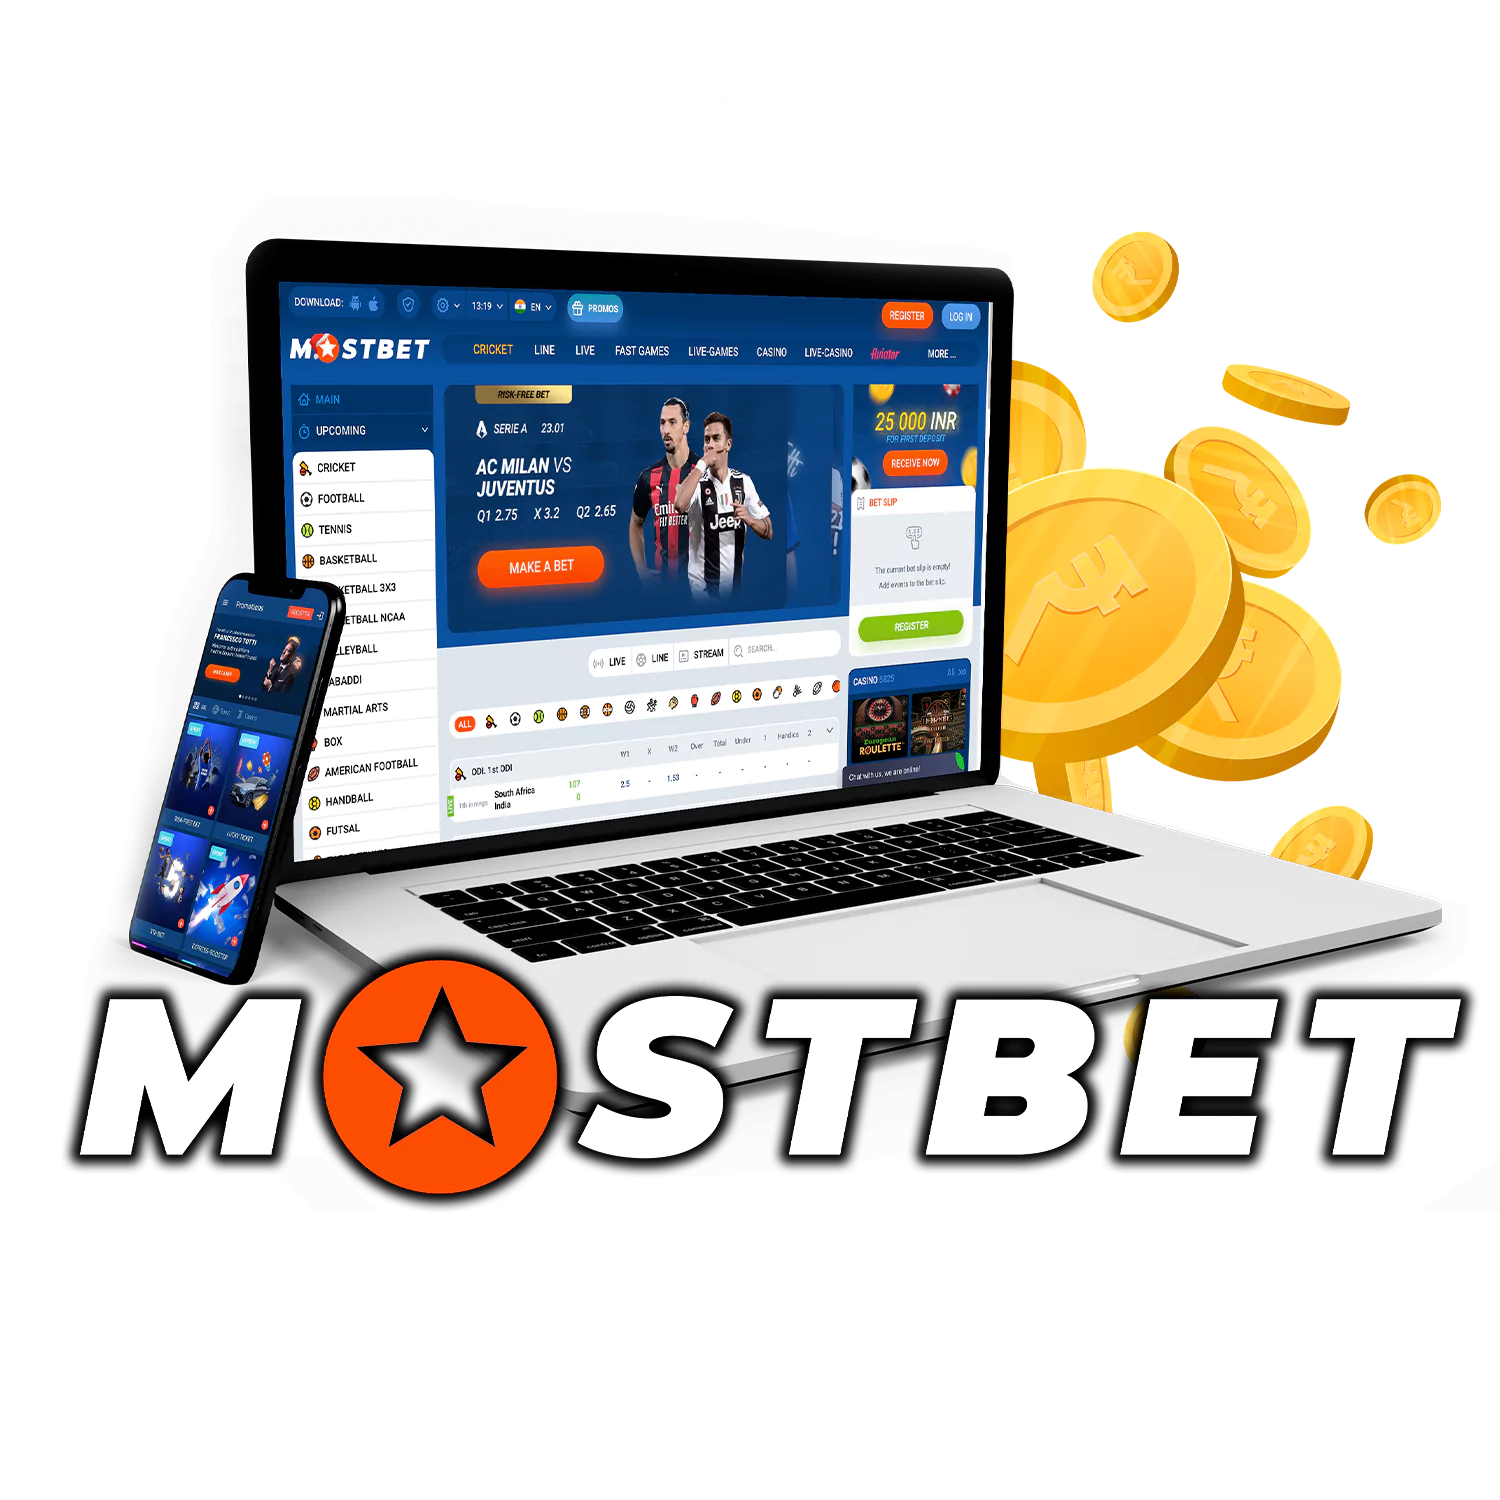 Mostbet — official website for sports betting and casino entertainments in India.